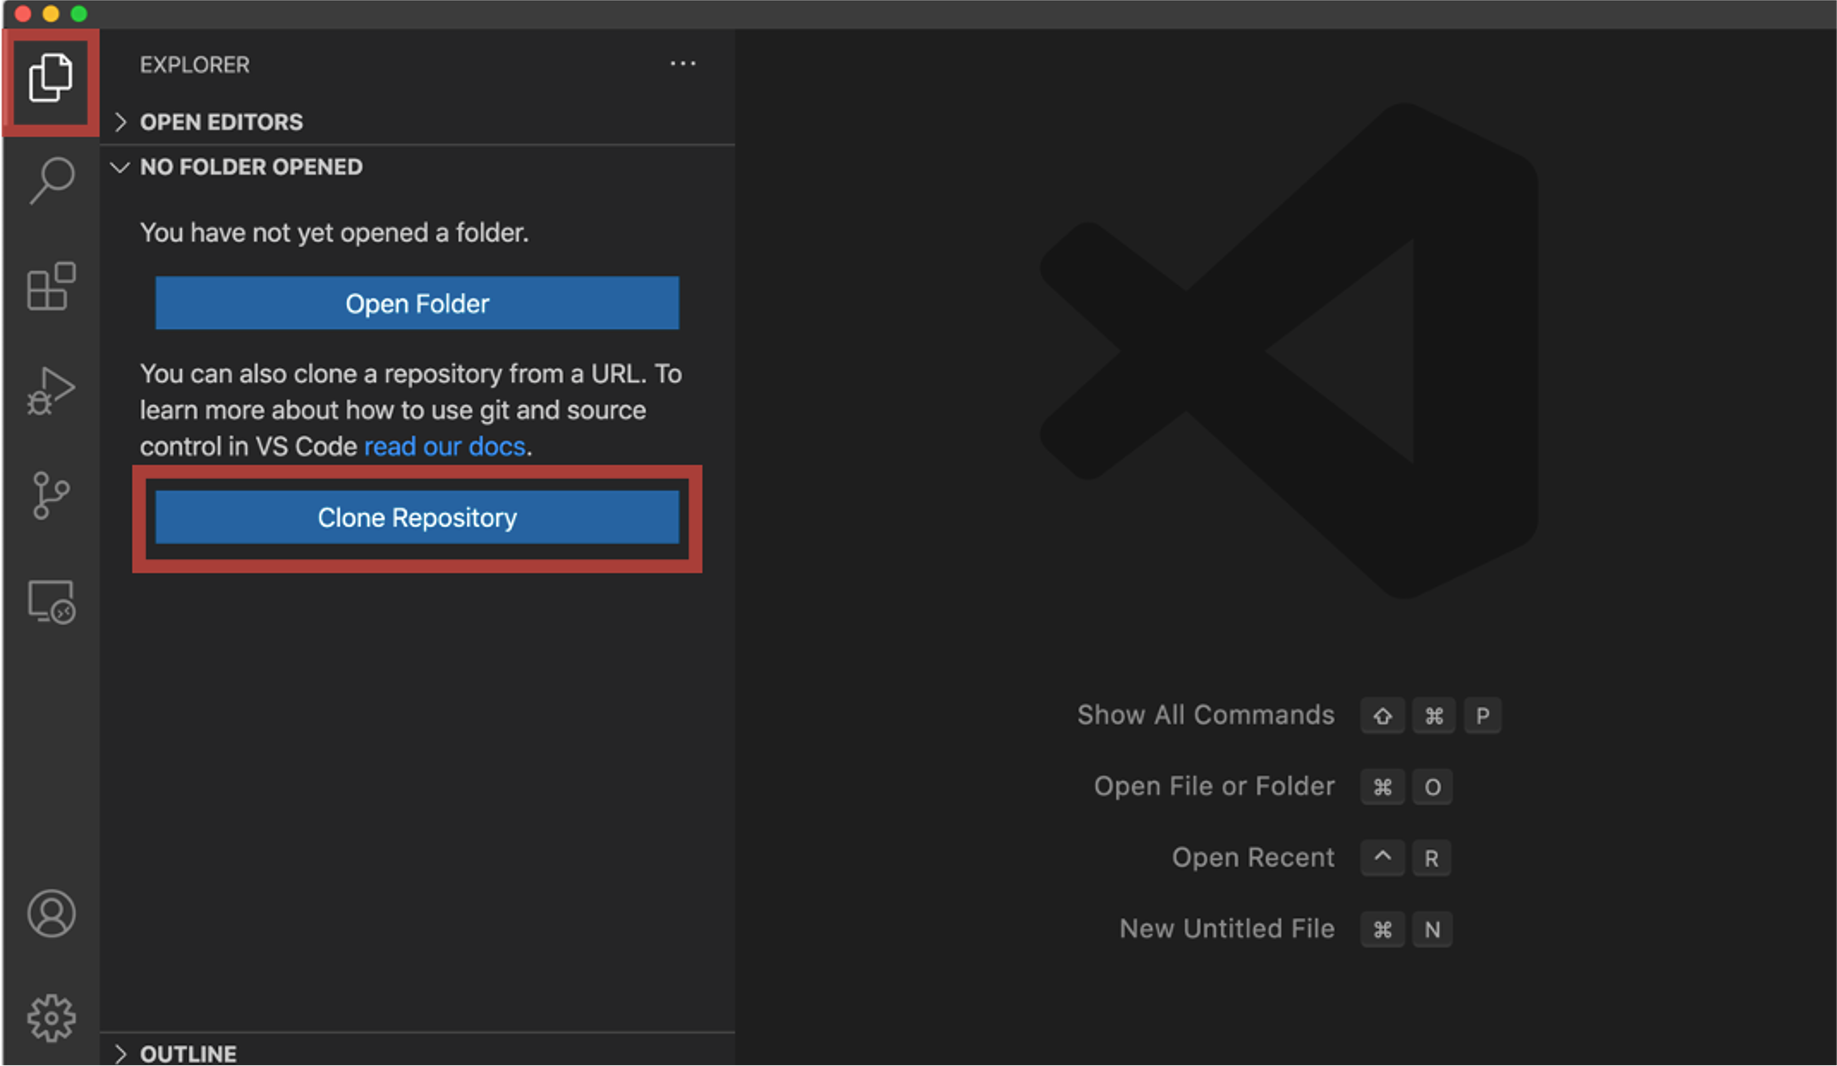 The option for cloning a repository in the Visual Studio Code Explorer view.